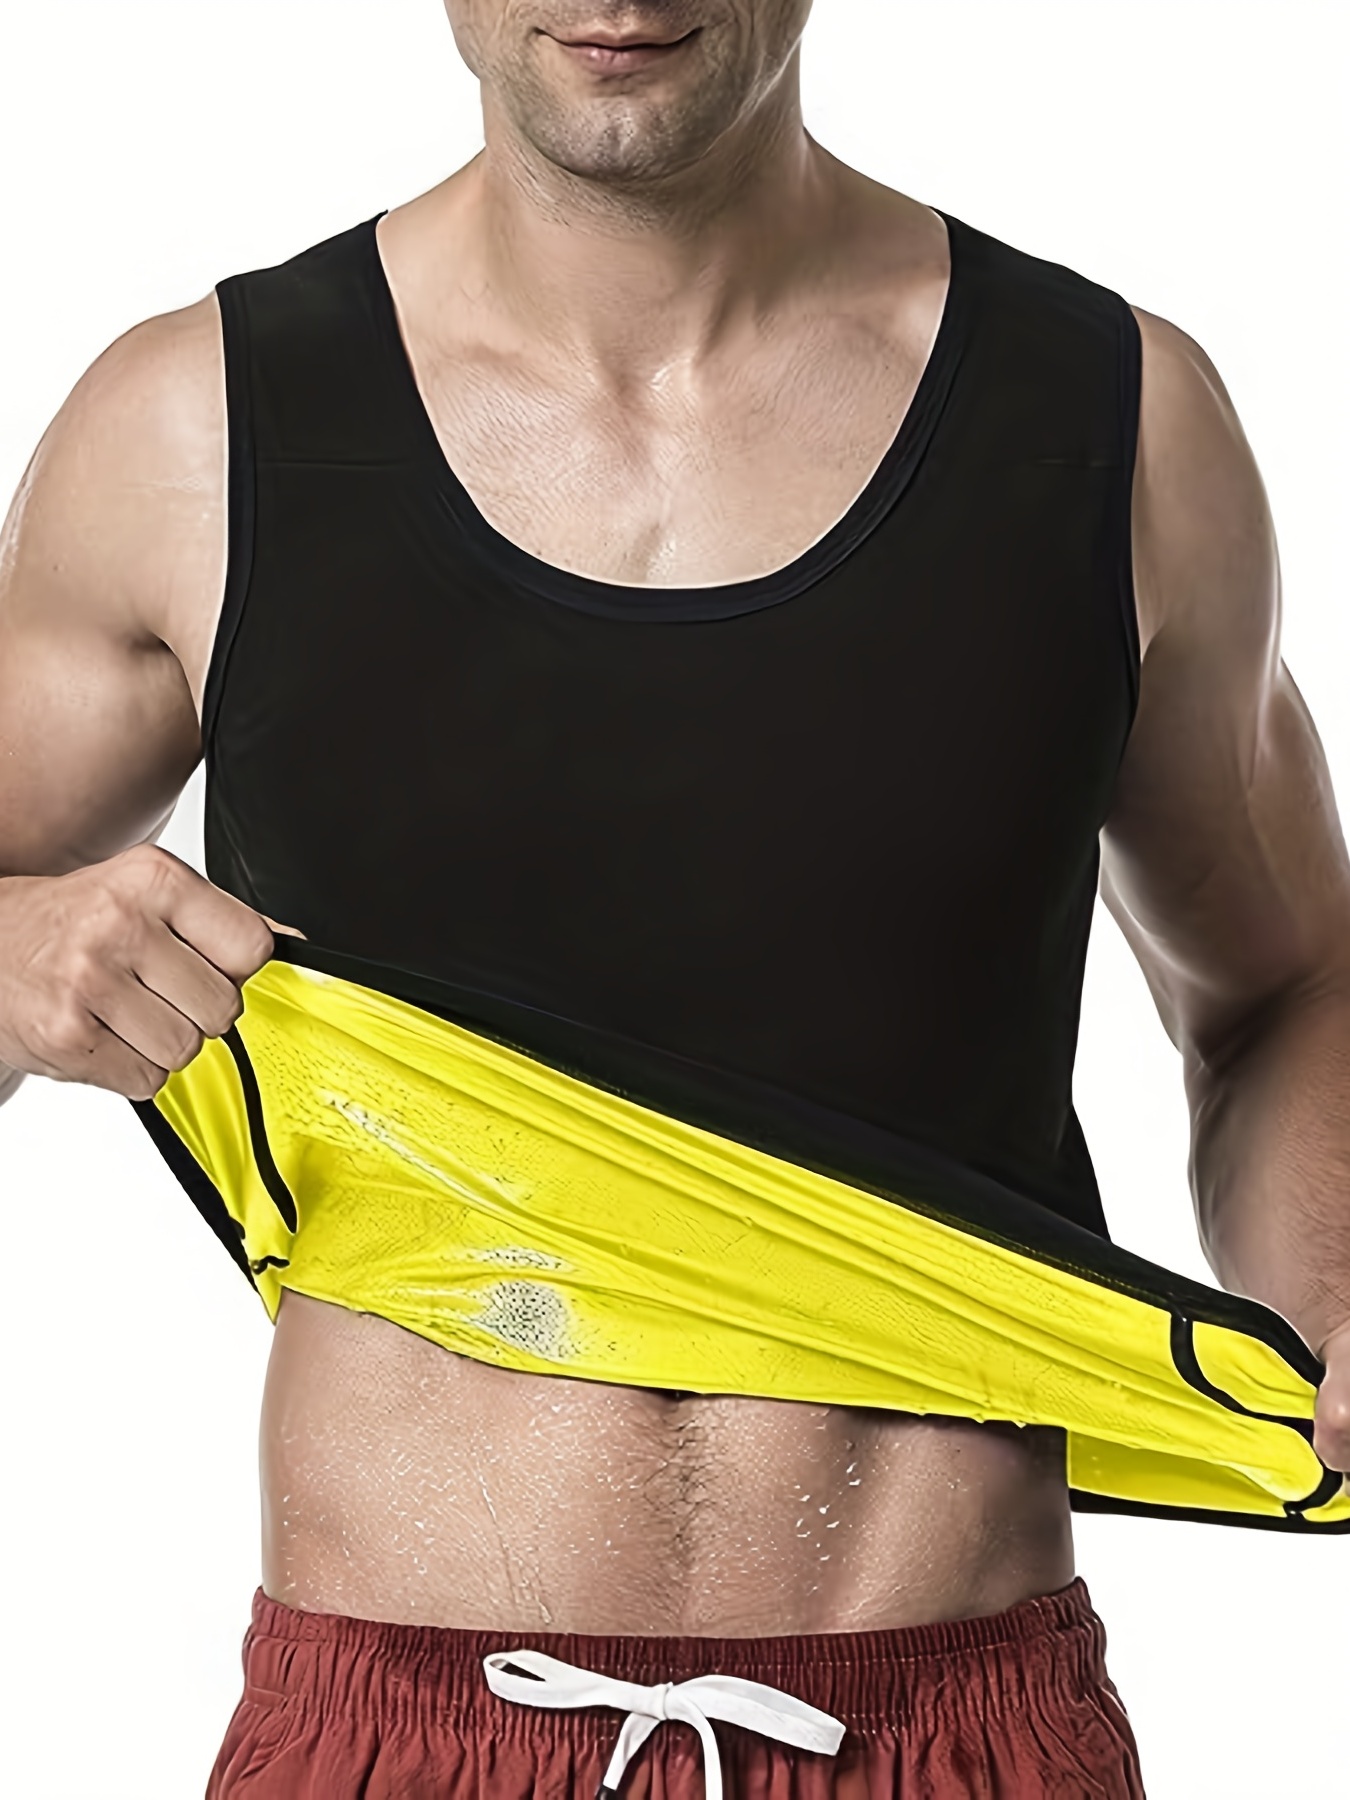 Mens Chest Binder Bra Body Shapewear Tank Top Stretchy Crop Top For  Fitness, Slimming And Comfortable Available In 6XL Plus Sizes From  Clothingdh, $48.54